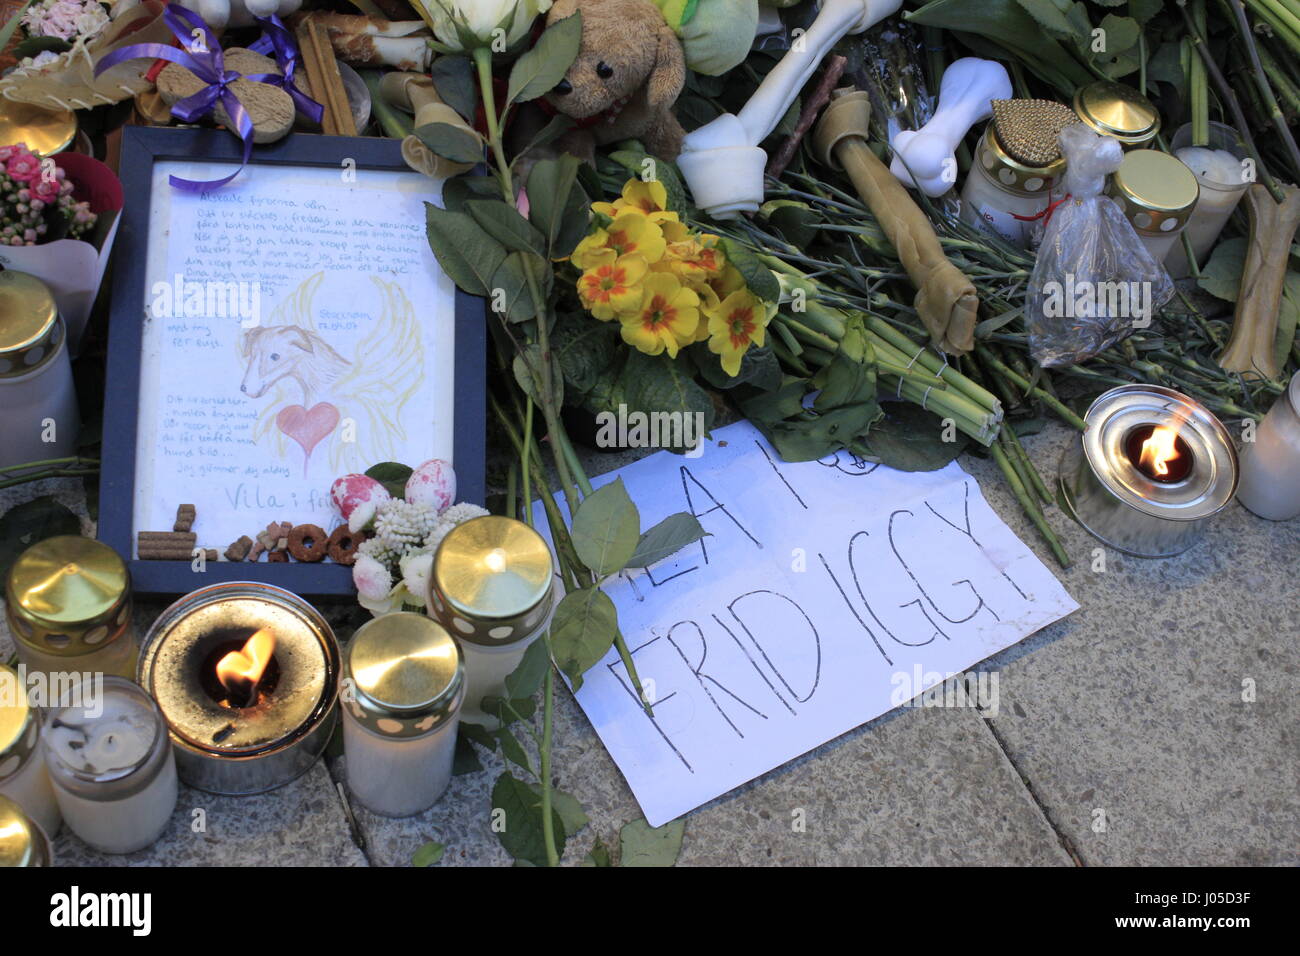 Stockholm, Sweden. 10th April, 2017. Flowers and phrases dedicated to the memory of Iggy the dog, which lost its life which was hit in Drottninggatan street by the terrorist truck attacker in Stockholm city. Sweden 10 April 2017. Credit: BasilT/Alamy Live News Stock Photo